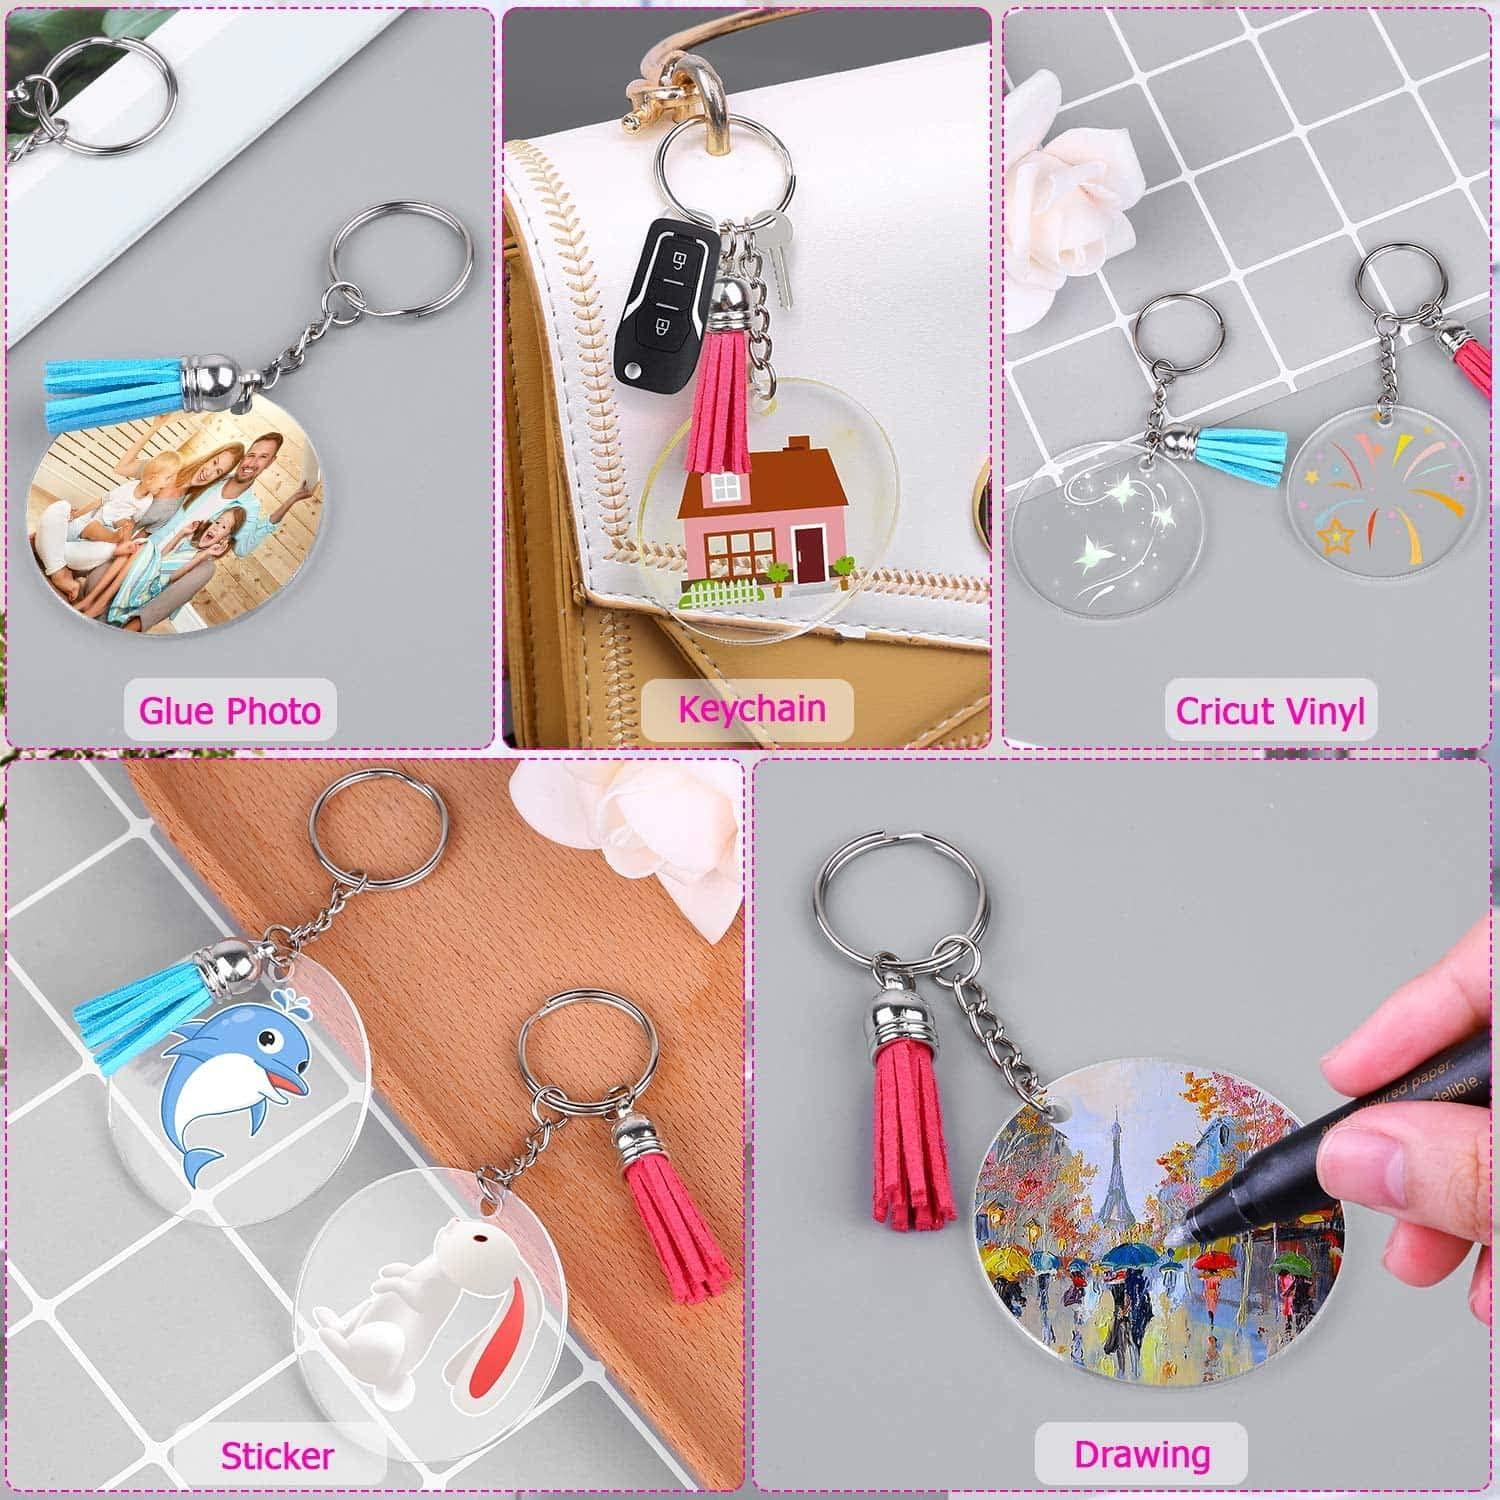 Acrylic Blank Keychains Shynek 200 Pcs Clear Keychain Blanks for Vinyl with  50 Pcs Acrylic Blanks 50 Pcs Keychain Tassels 50 Pcs Key Rings with Chain  and 50 Pcs Jump Rings 200 multicolors